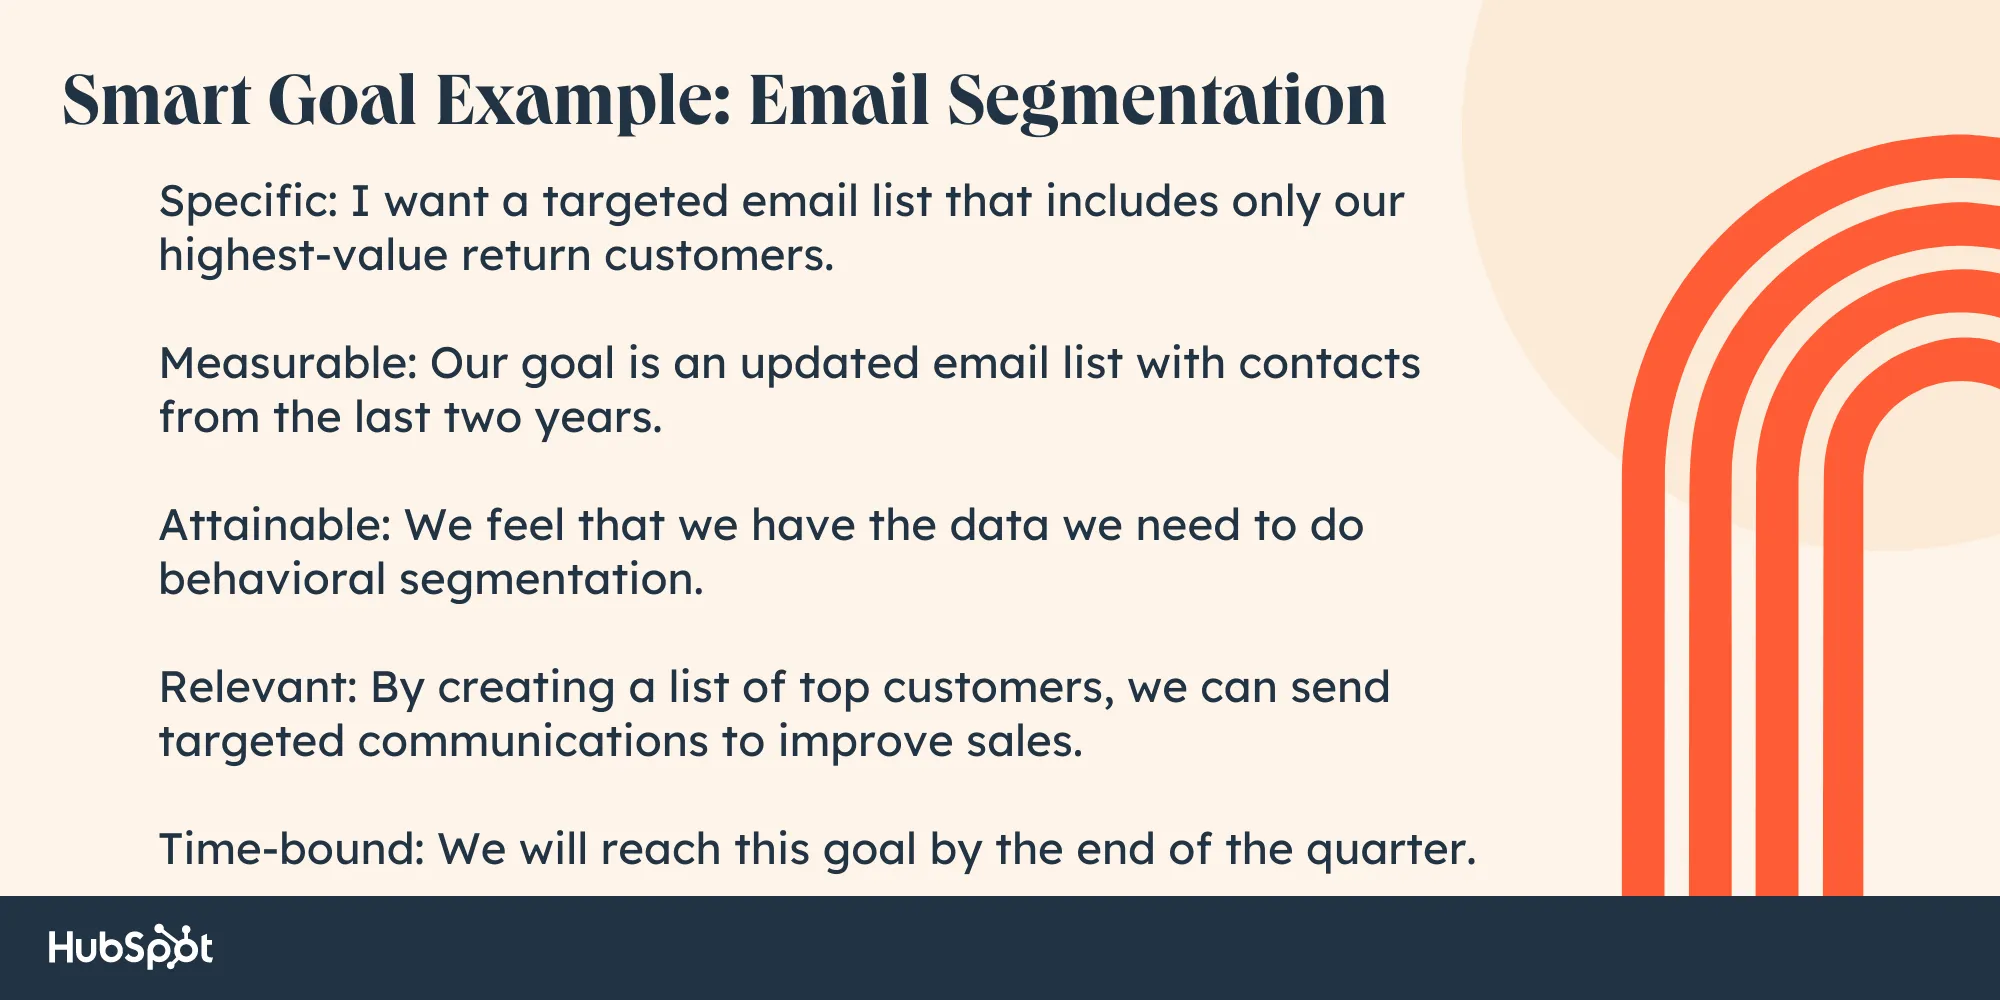 Example of customer segmentation by using the SMART goals approach: Specific - I want a target email list that includes only our highest-value return customers; Measurable - Our goal is an updated email list with contacts from the last two years; Attainable - We already have demographic segmentation and feel that we have the data we need to do behavioral segmentation; Relevant - By creating a list of top customers, we can send targeted communications to improve sales of our highest-value products; Time-bound - We will reach this goal by the end of the quarter.